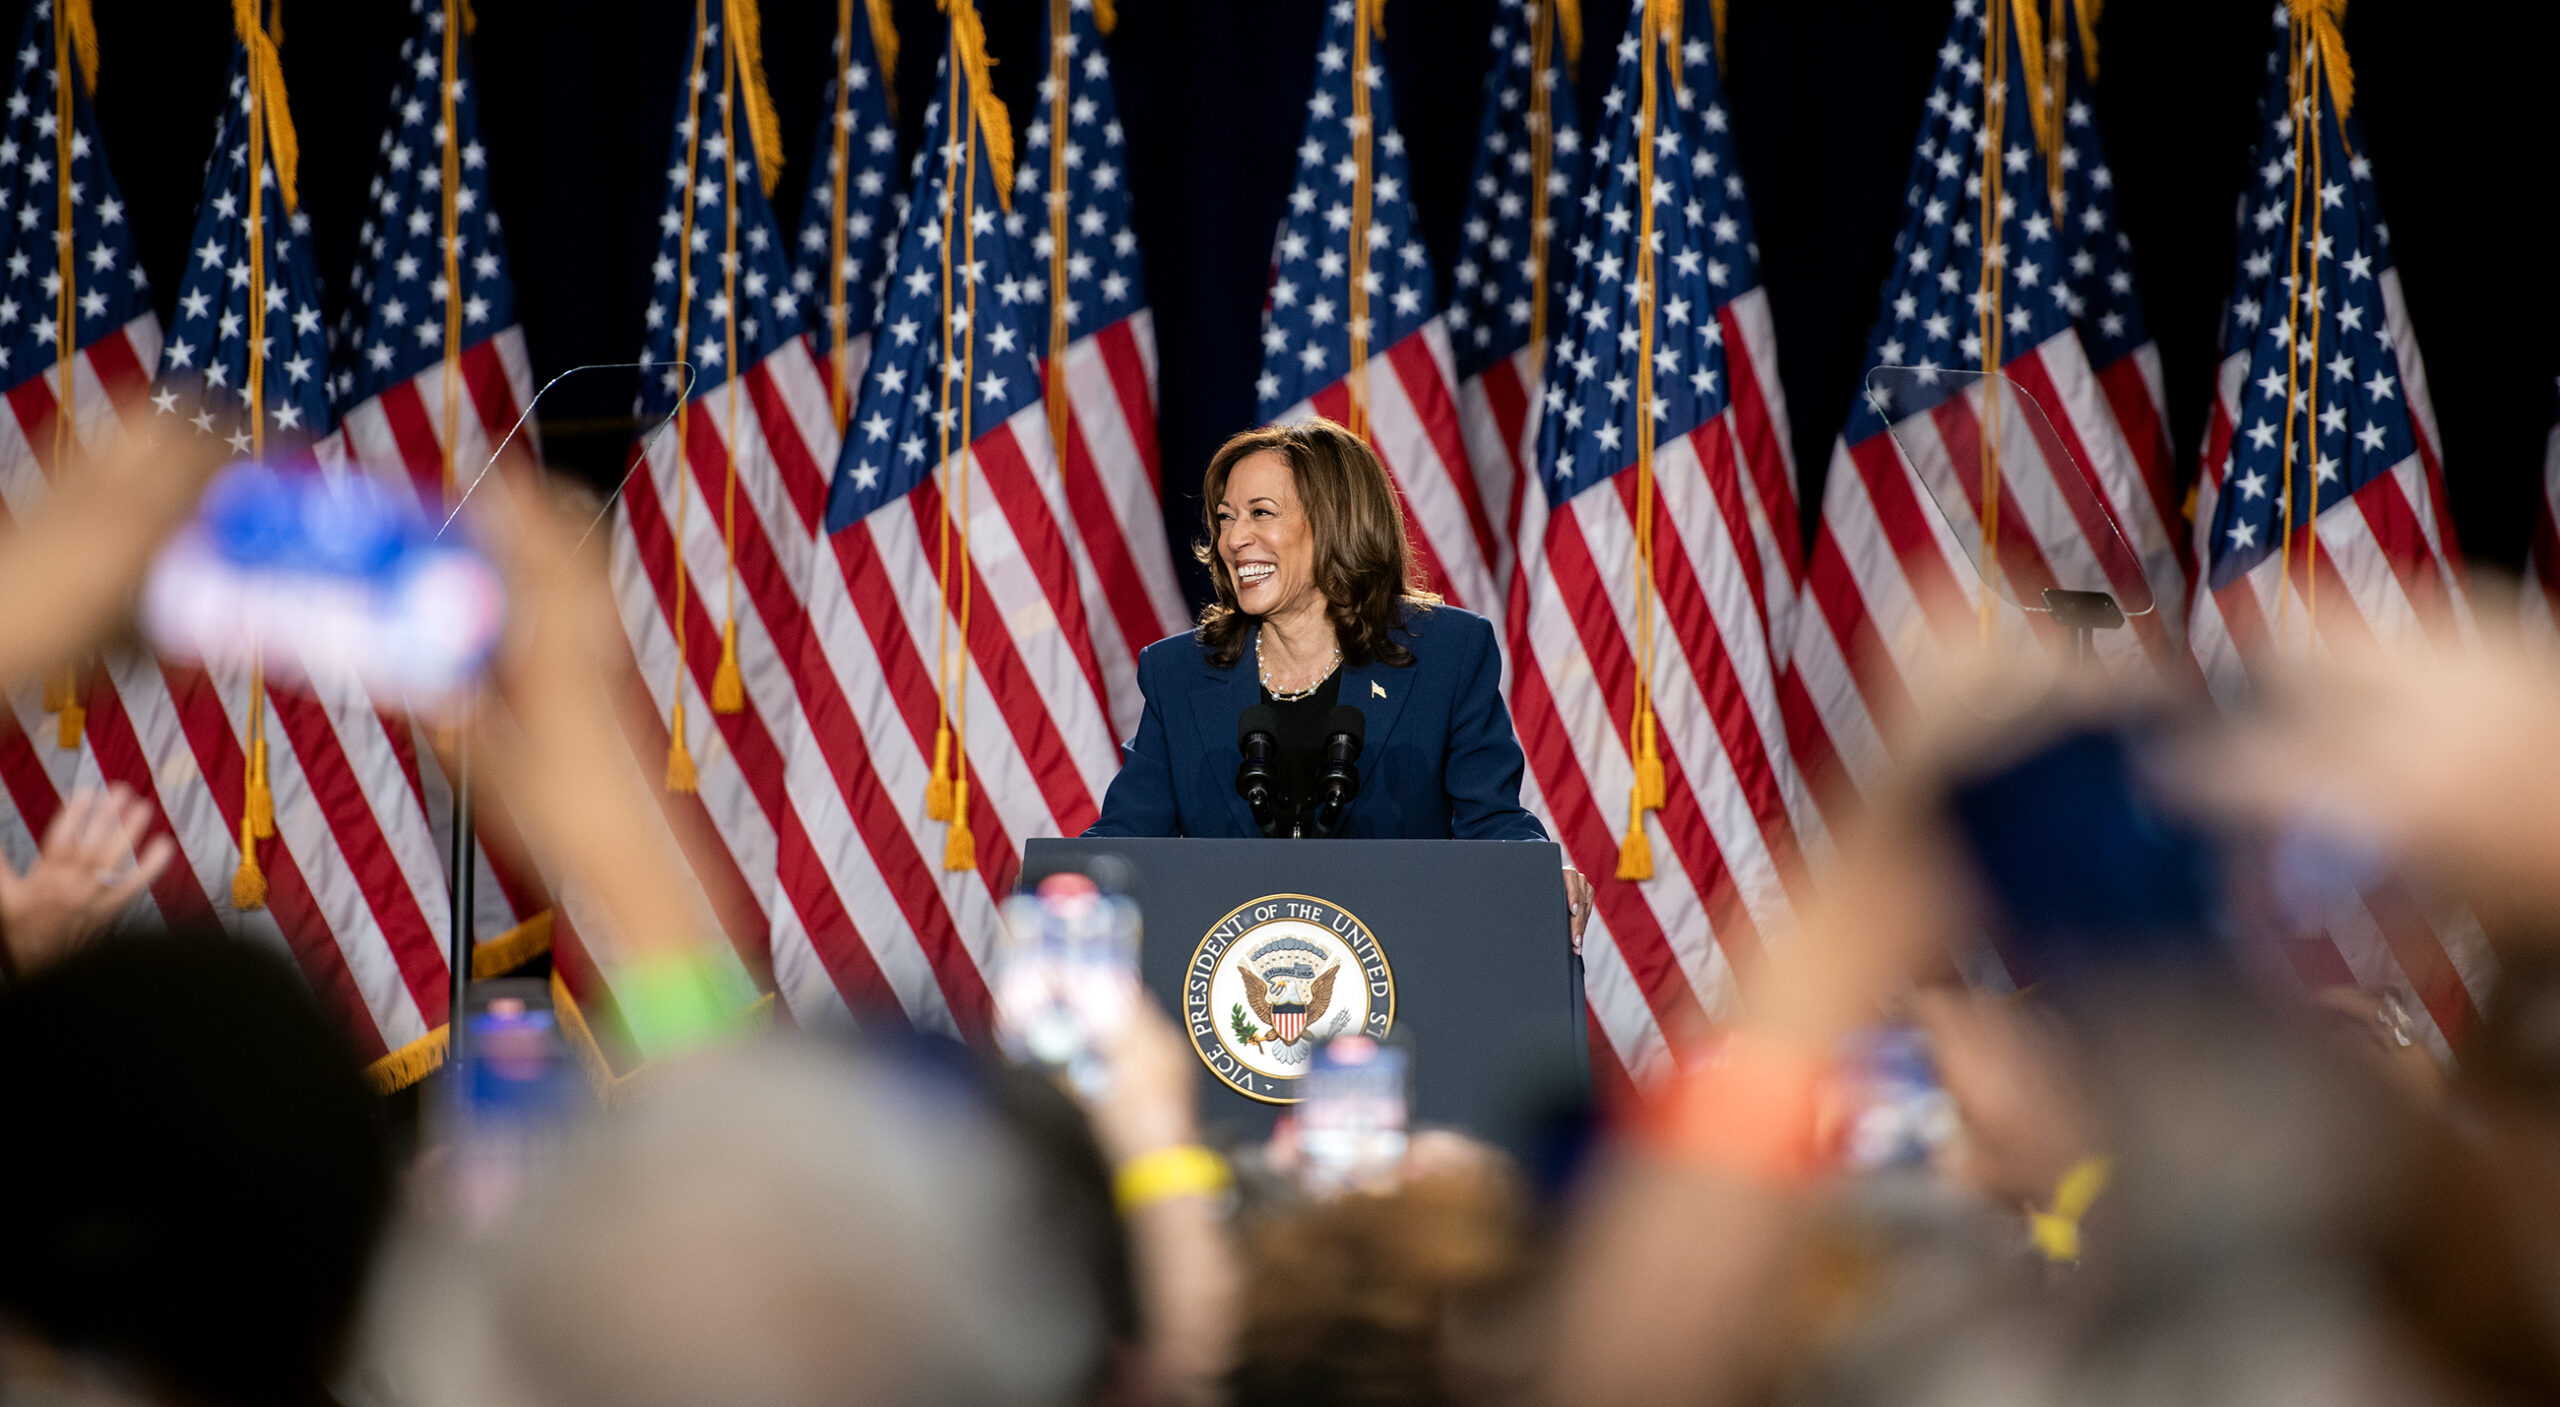 Harris makes fifth visit to Wisconsin this year — her first as presumptive presidential nominee